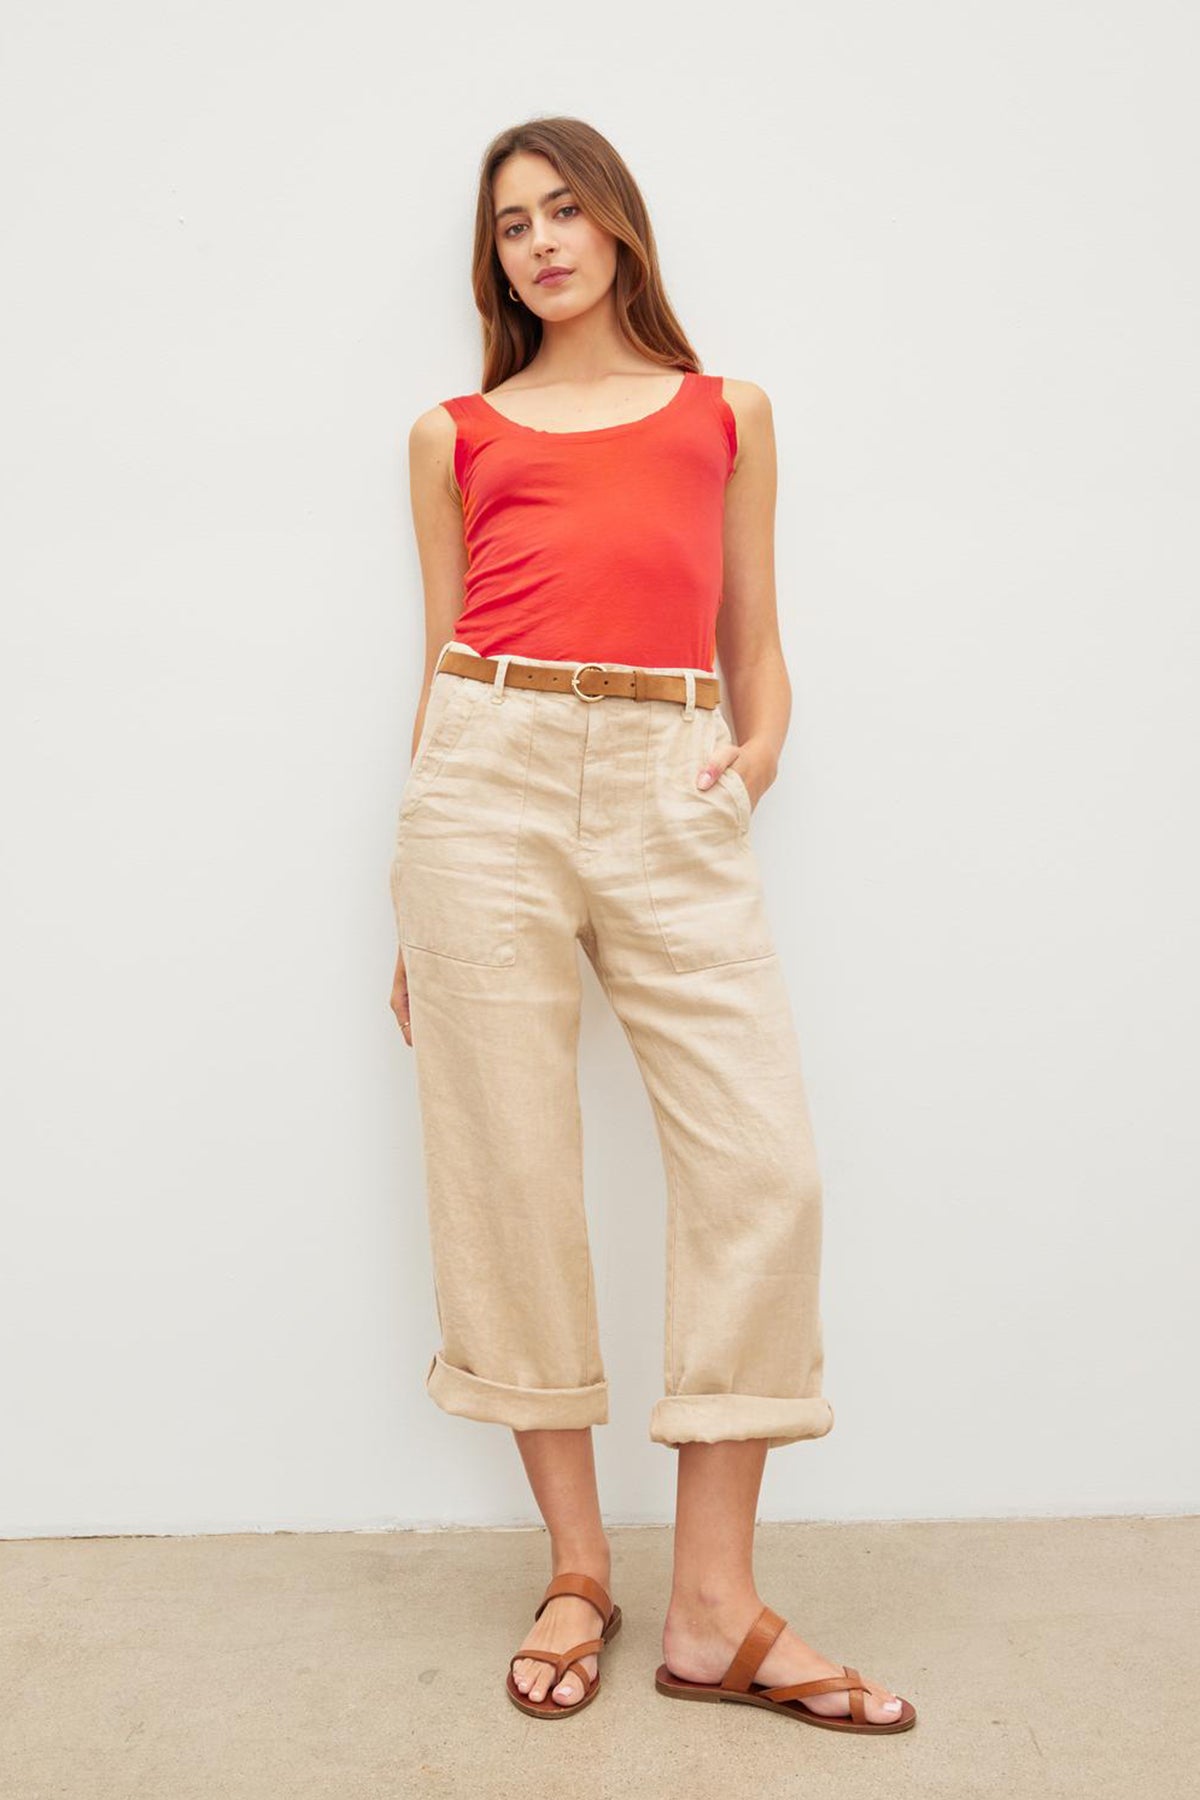 The model is wearing a red Velvet by Graham & Spencer MOSSY GAUZY WHISPER FITTED TANK and tan cropped pants.-36010151313601